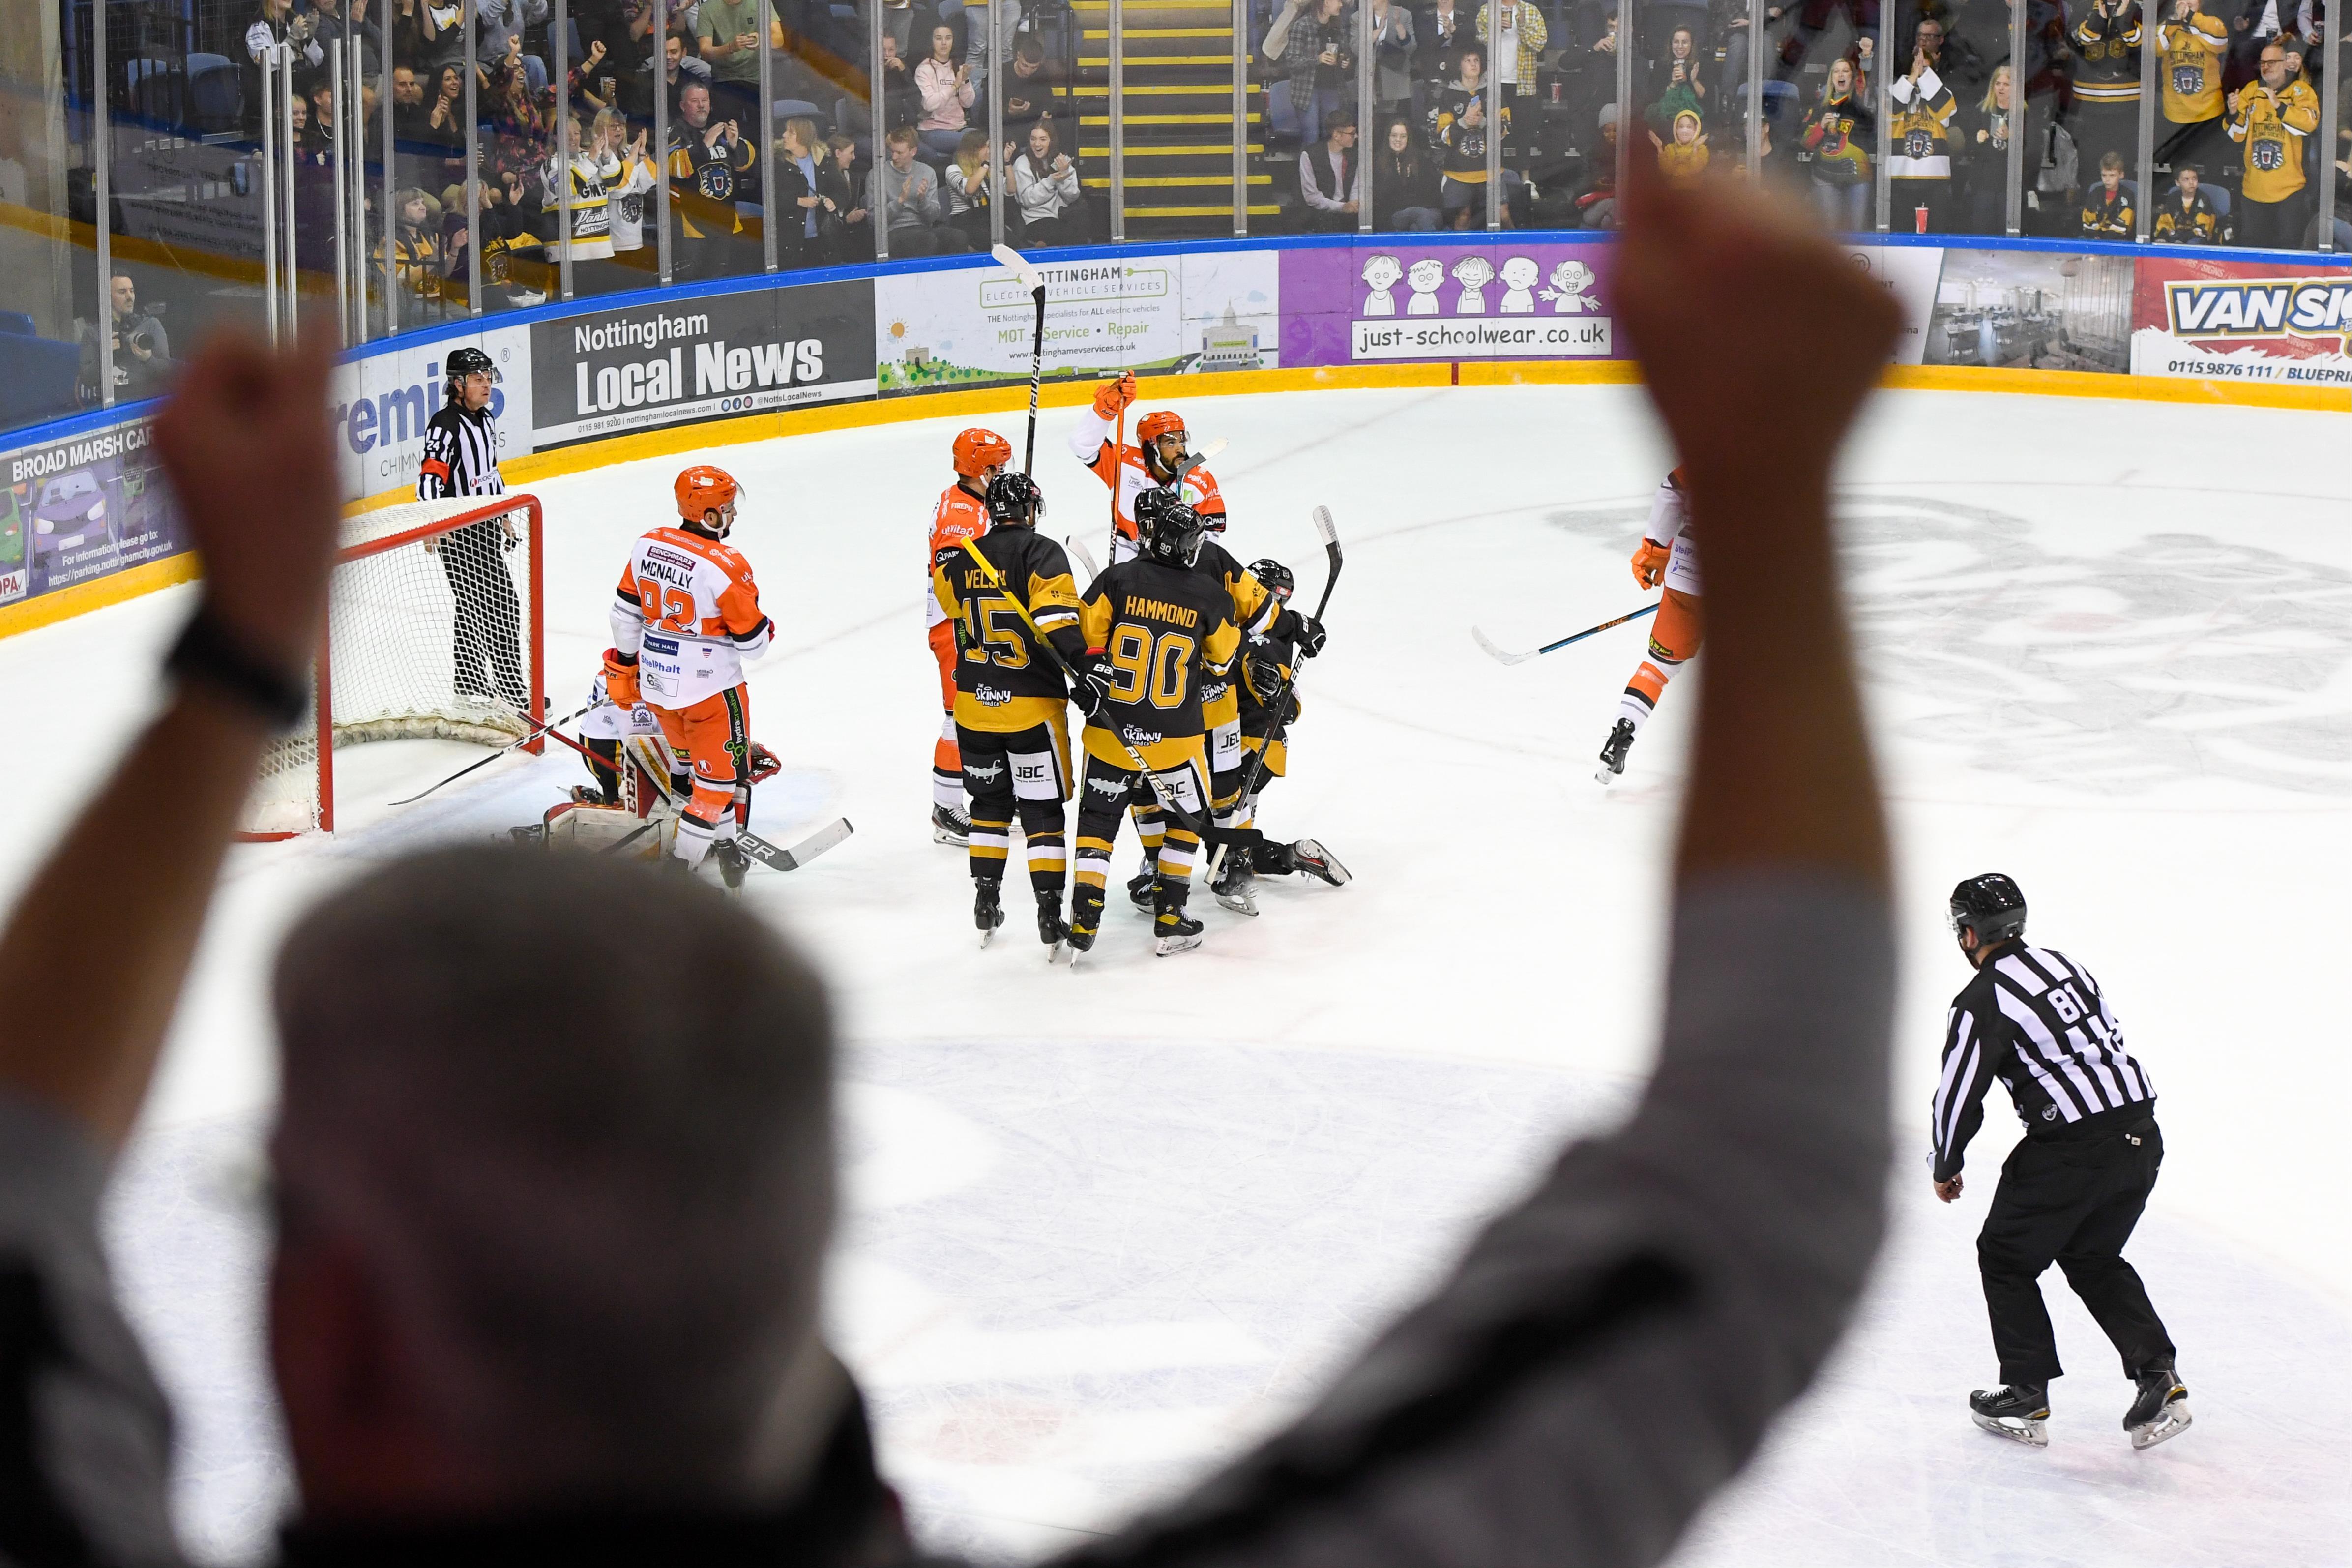 TICKETS NOW ON SALE FOR STEELERS AND BLAZE AT CHRISTMAS Top Image